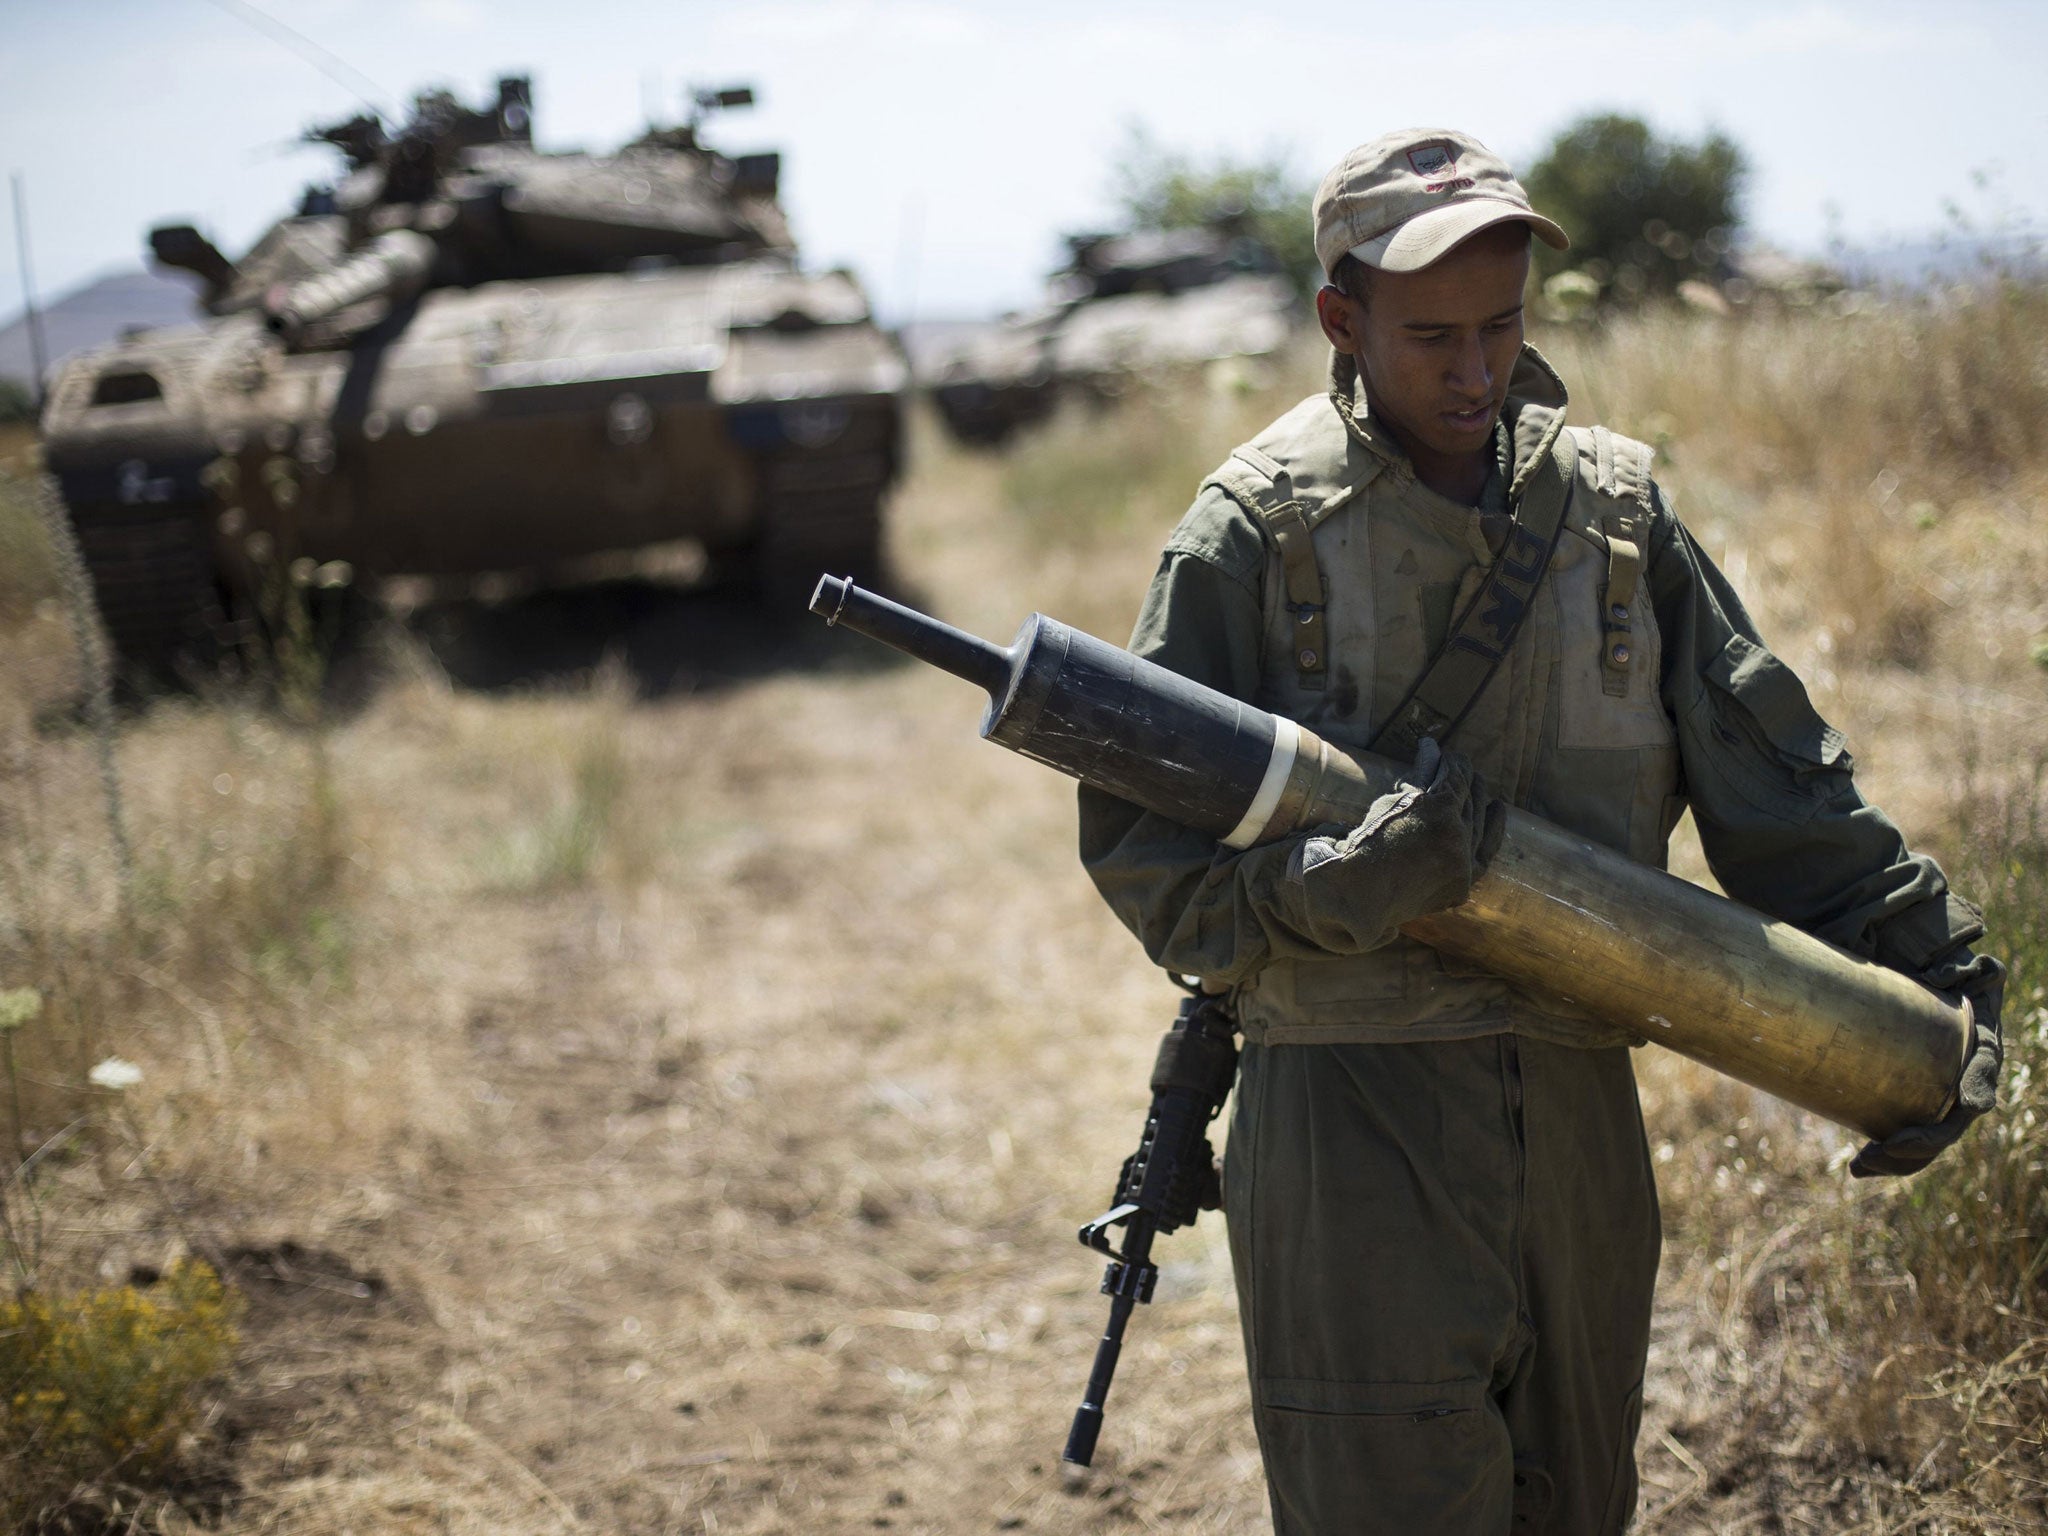 An Israeli soldier carries a tank shell near Alonei Habashan on the Israeli occupied Golan Heights, close to the ceasefire line between Israel and Syria June 22, 2014